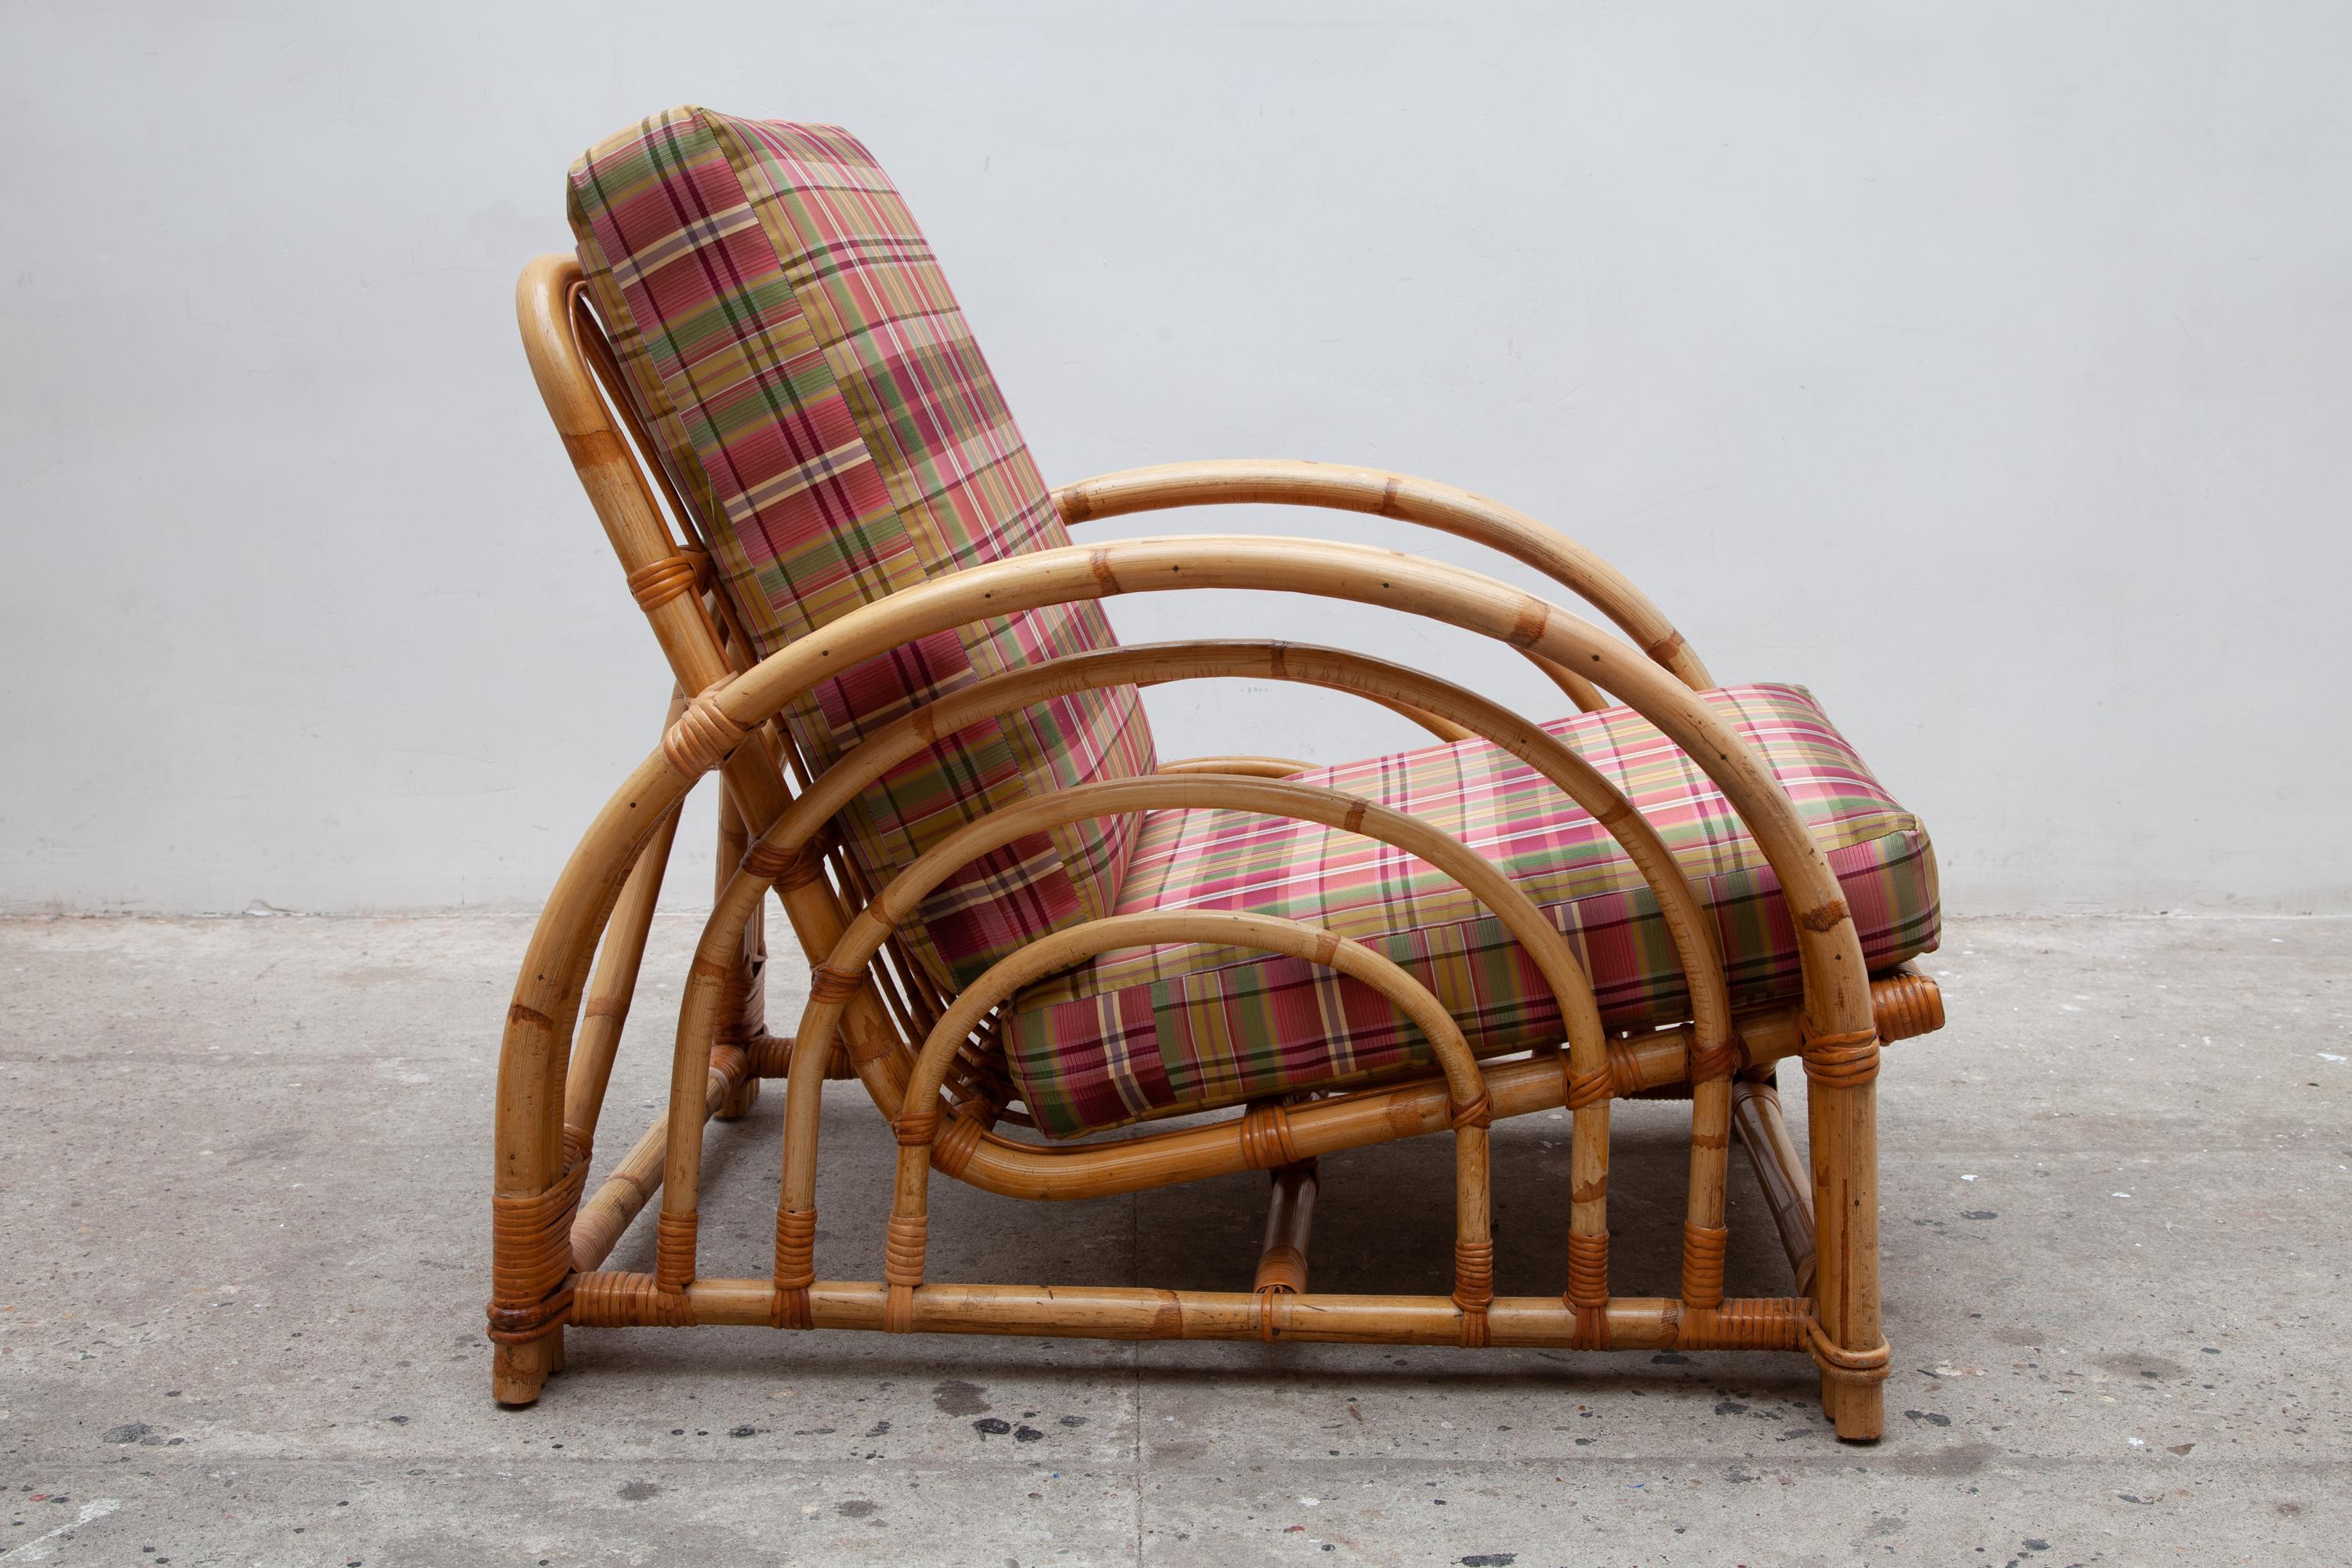 One of bend bamboo lounge chairs in the style of Paul Frankl. Features sculptural circular armrests and colorful plaid cushions. This Art Deco-inspired set retains a timeless style that would look great in any modern space. This lightweight yet